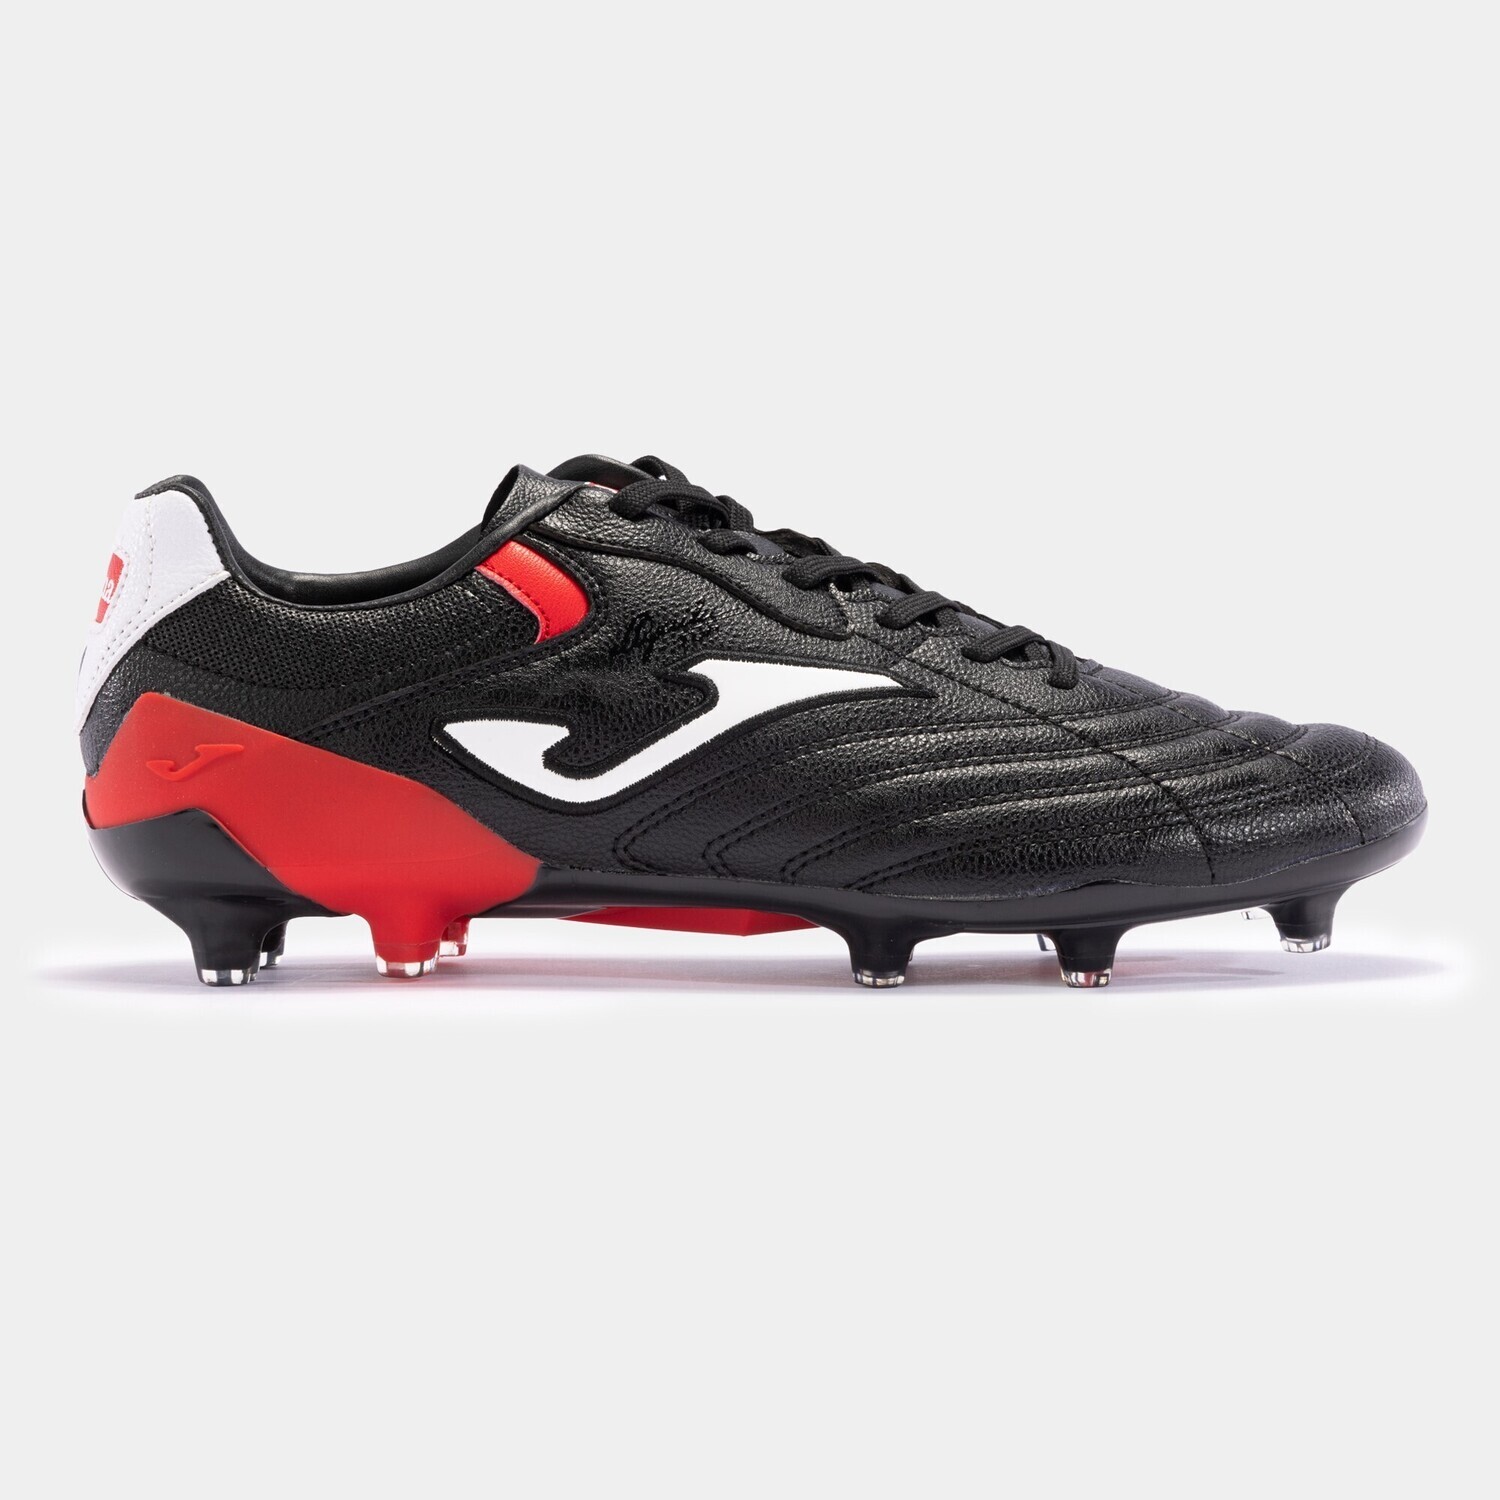 JOMA AGUILA CUP 2301 BLACK RED FIRM GROUND